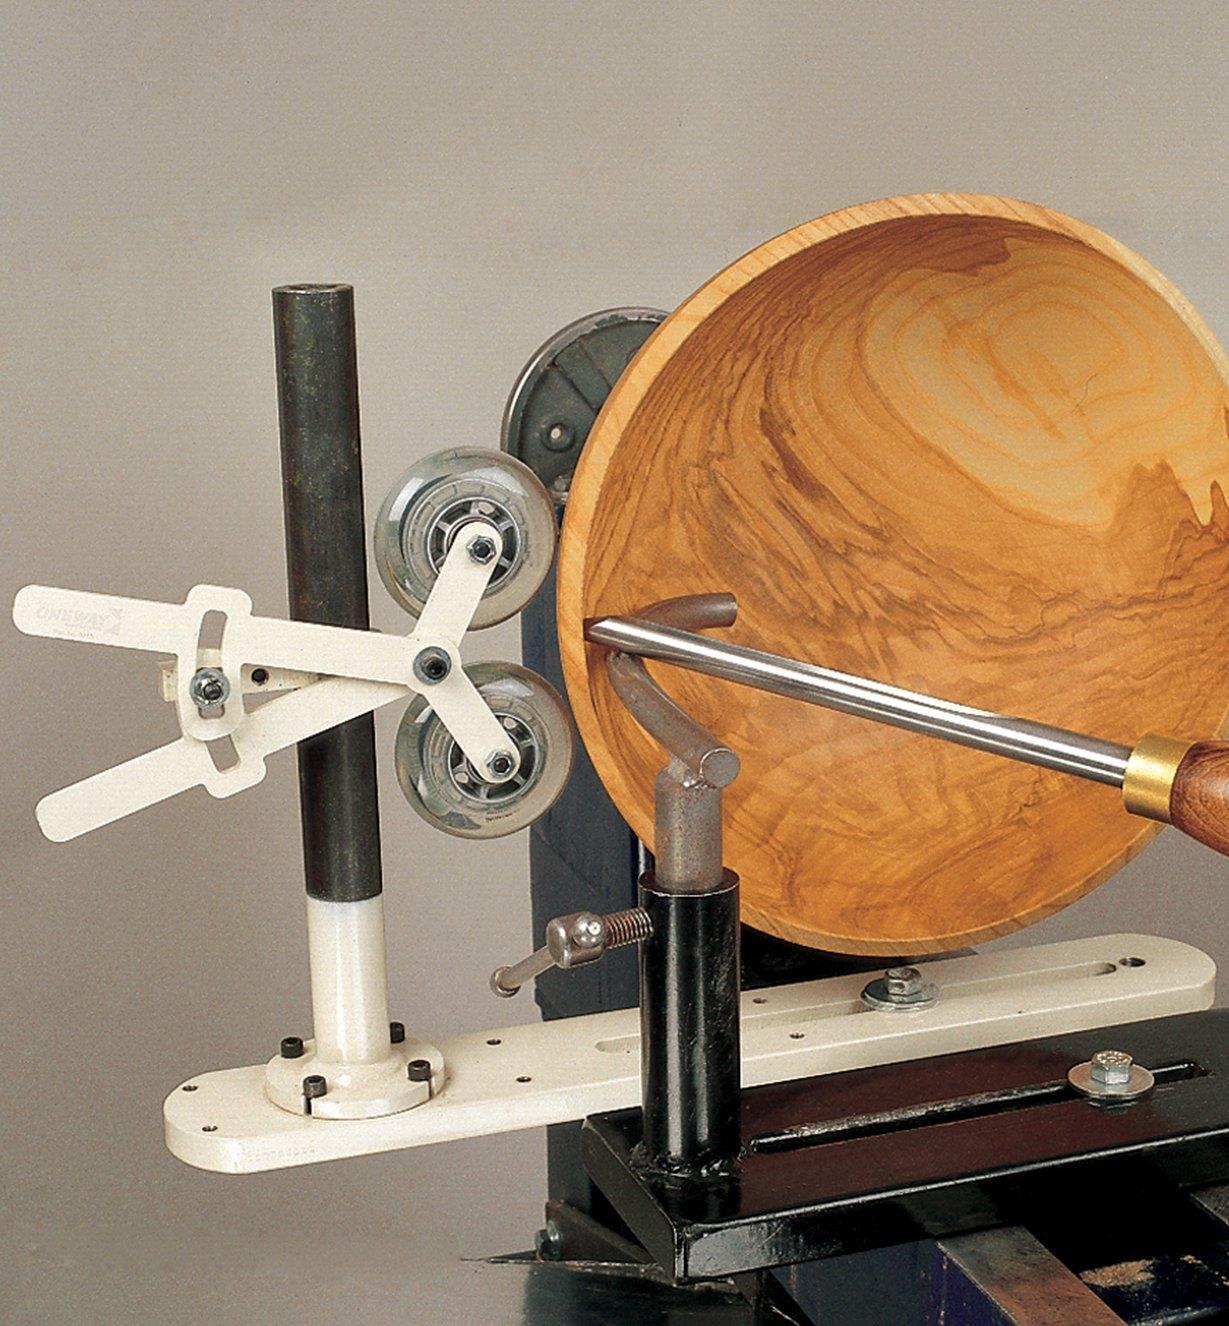 Bowl Steady positioned against a bowl on a lathe